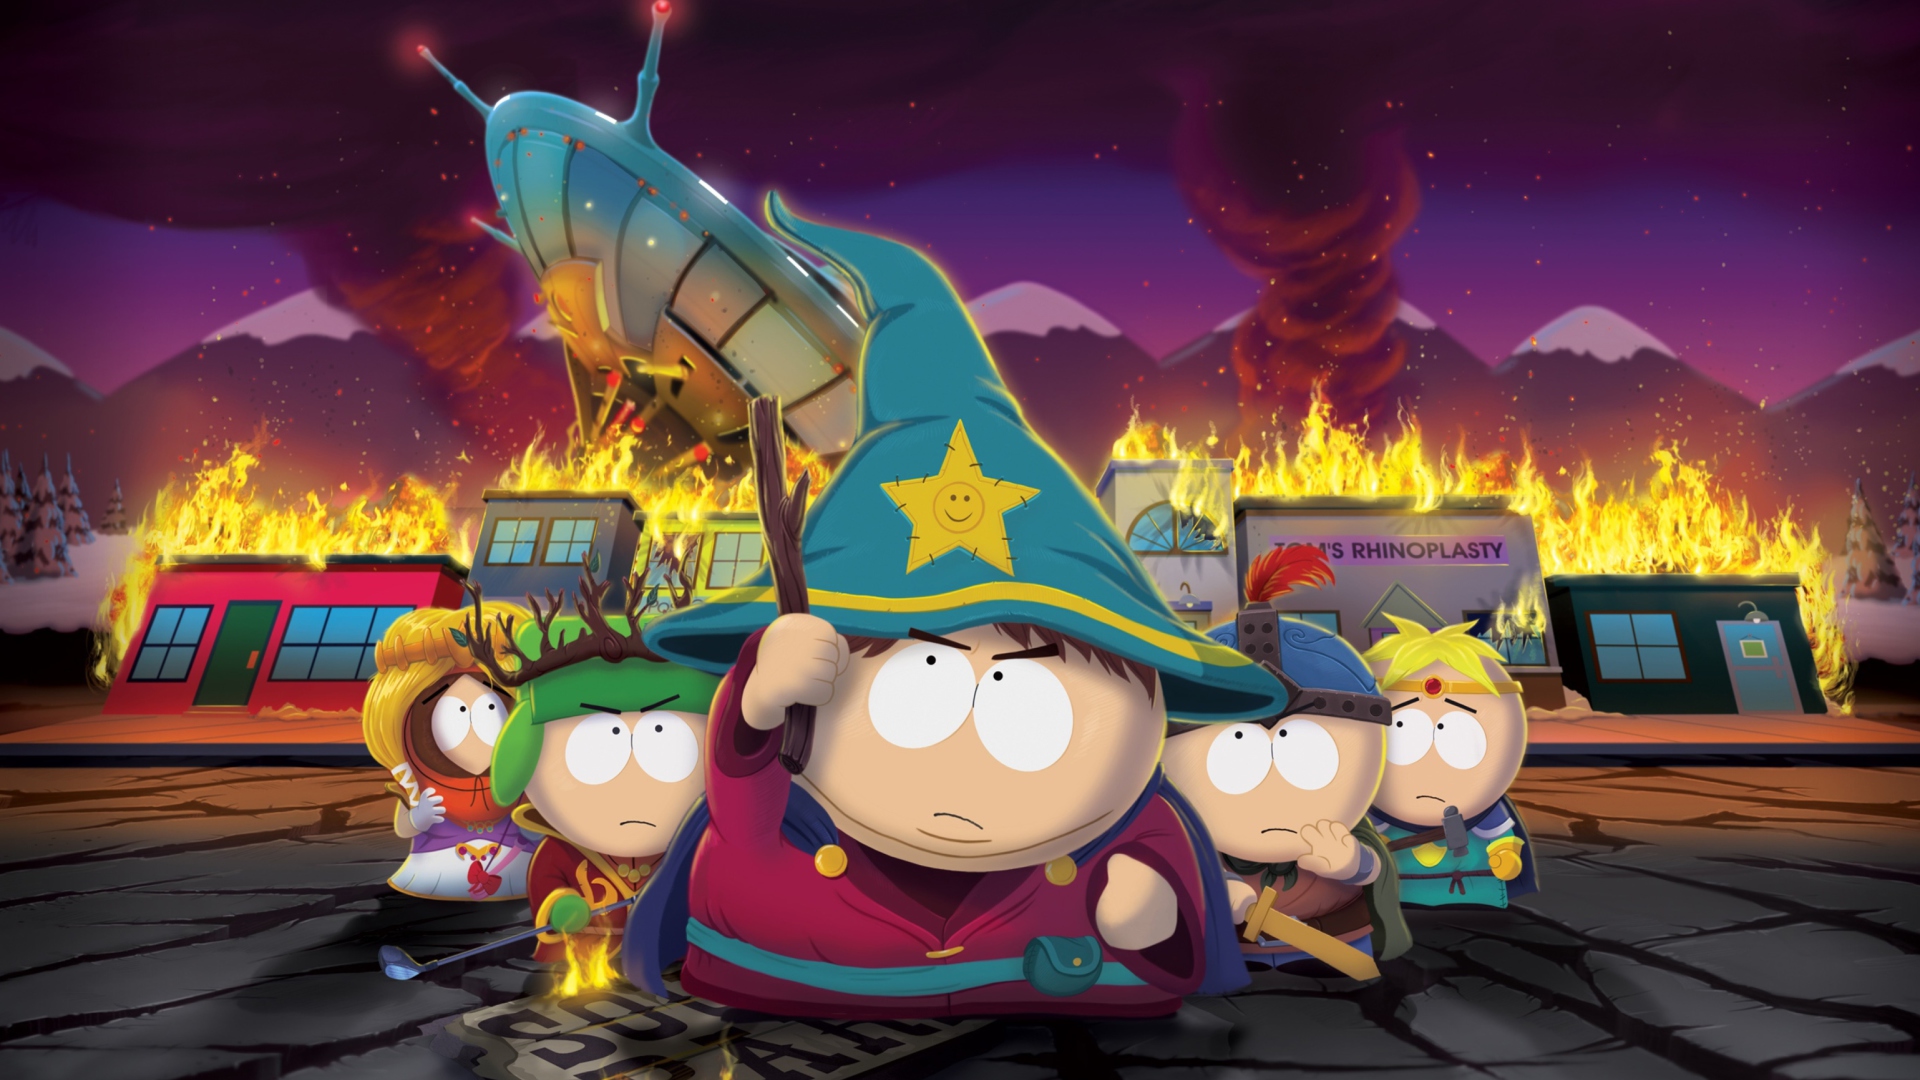 South Park The Stick Of Truth wallpaper 1920x1080